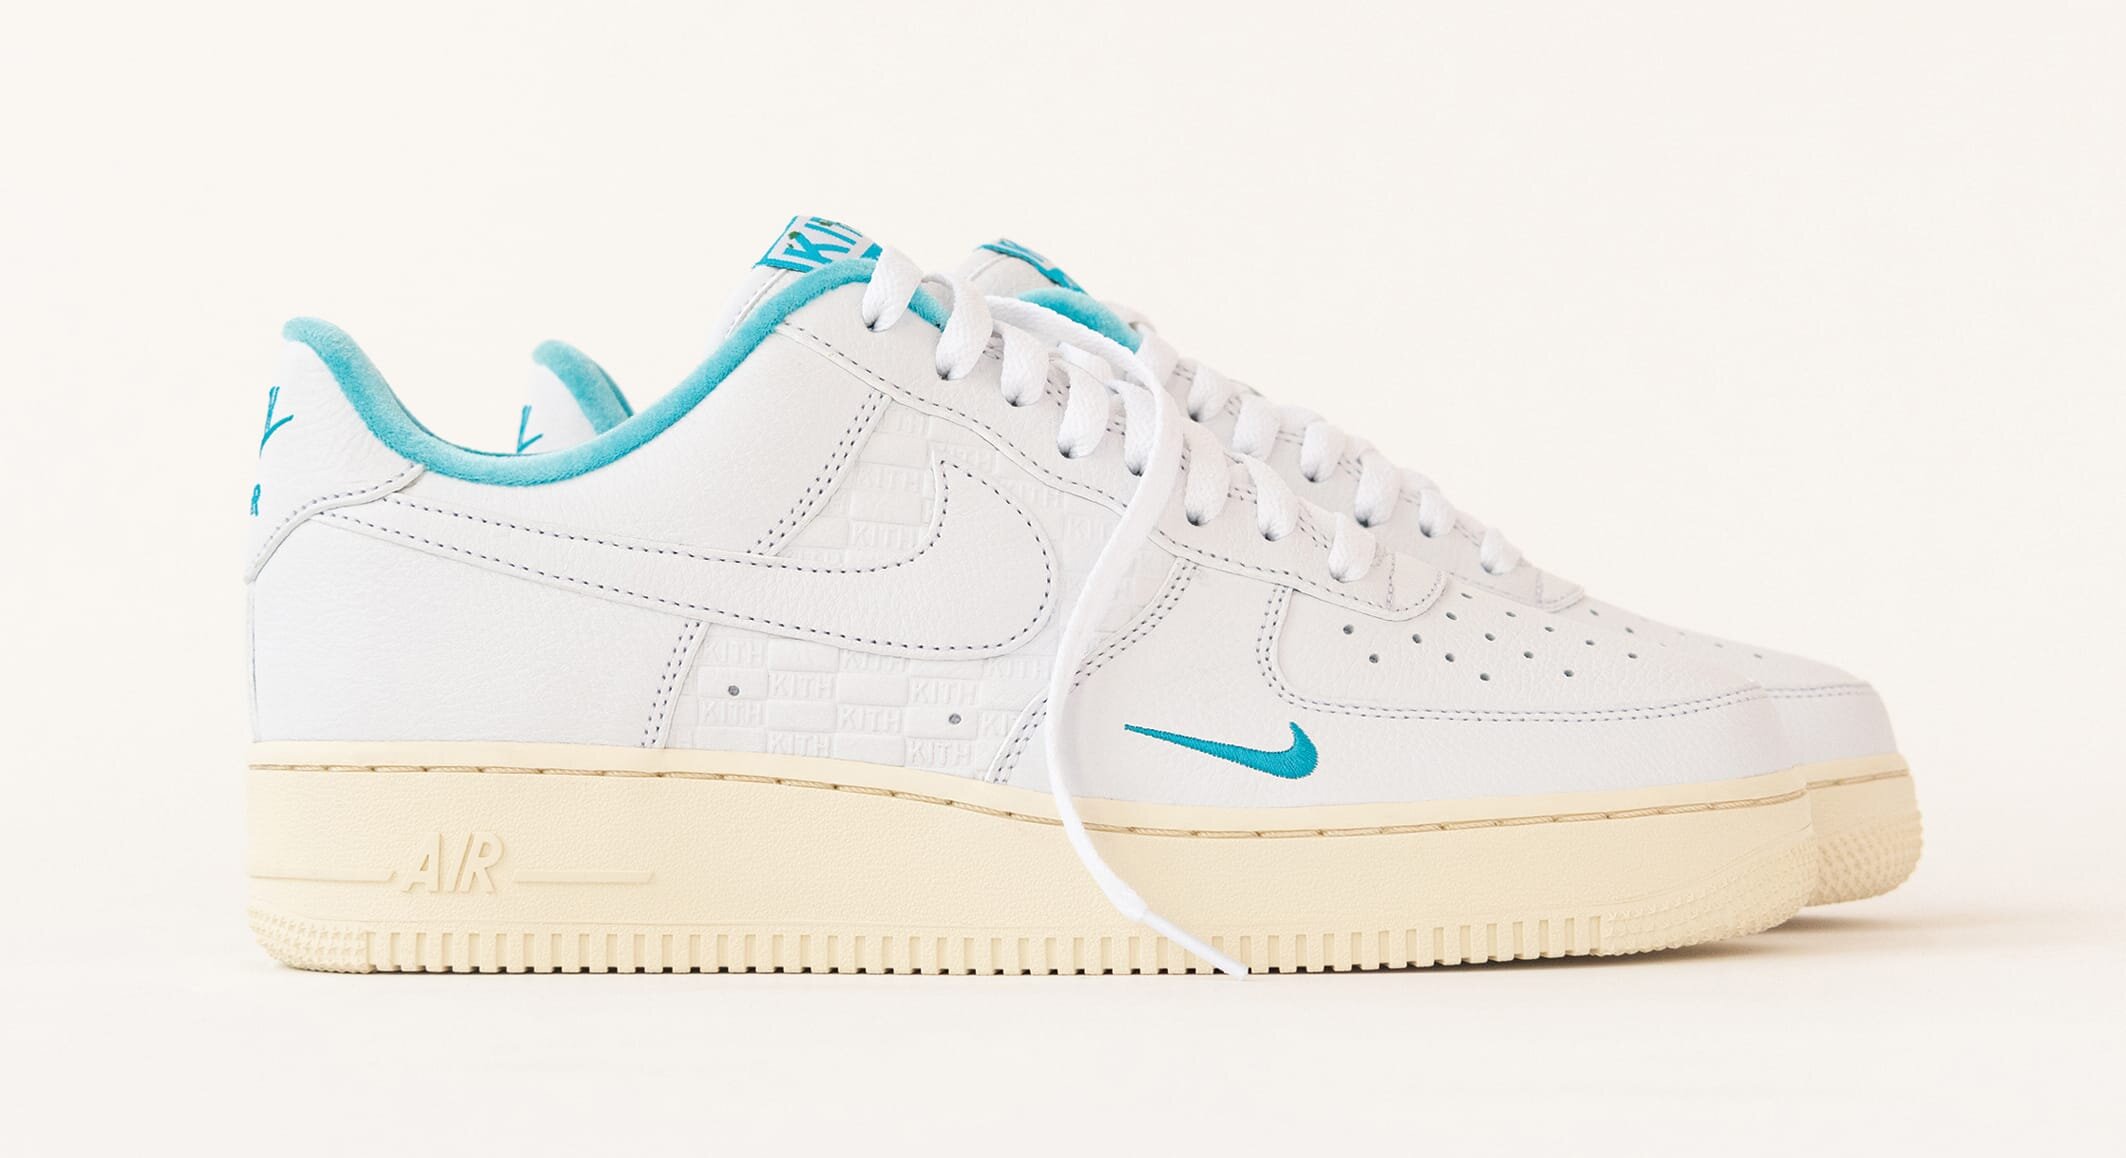 Kith x Nike Air Force 1 Low "Hawaii" — For The So[U]le